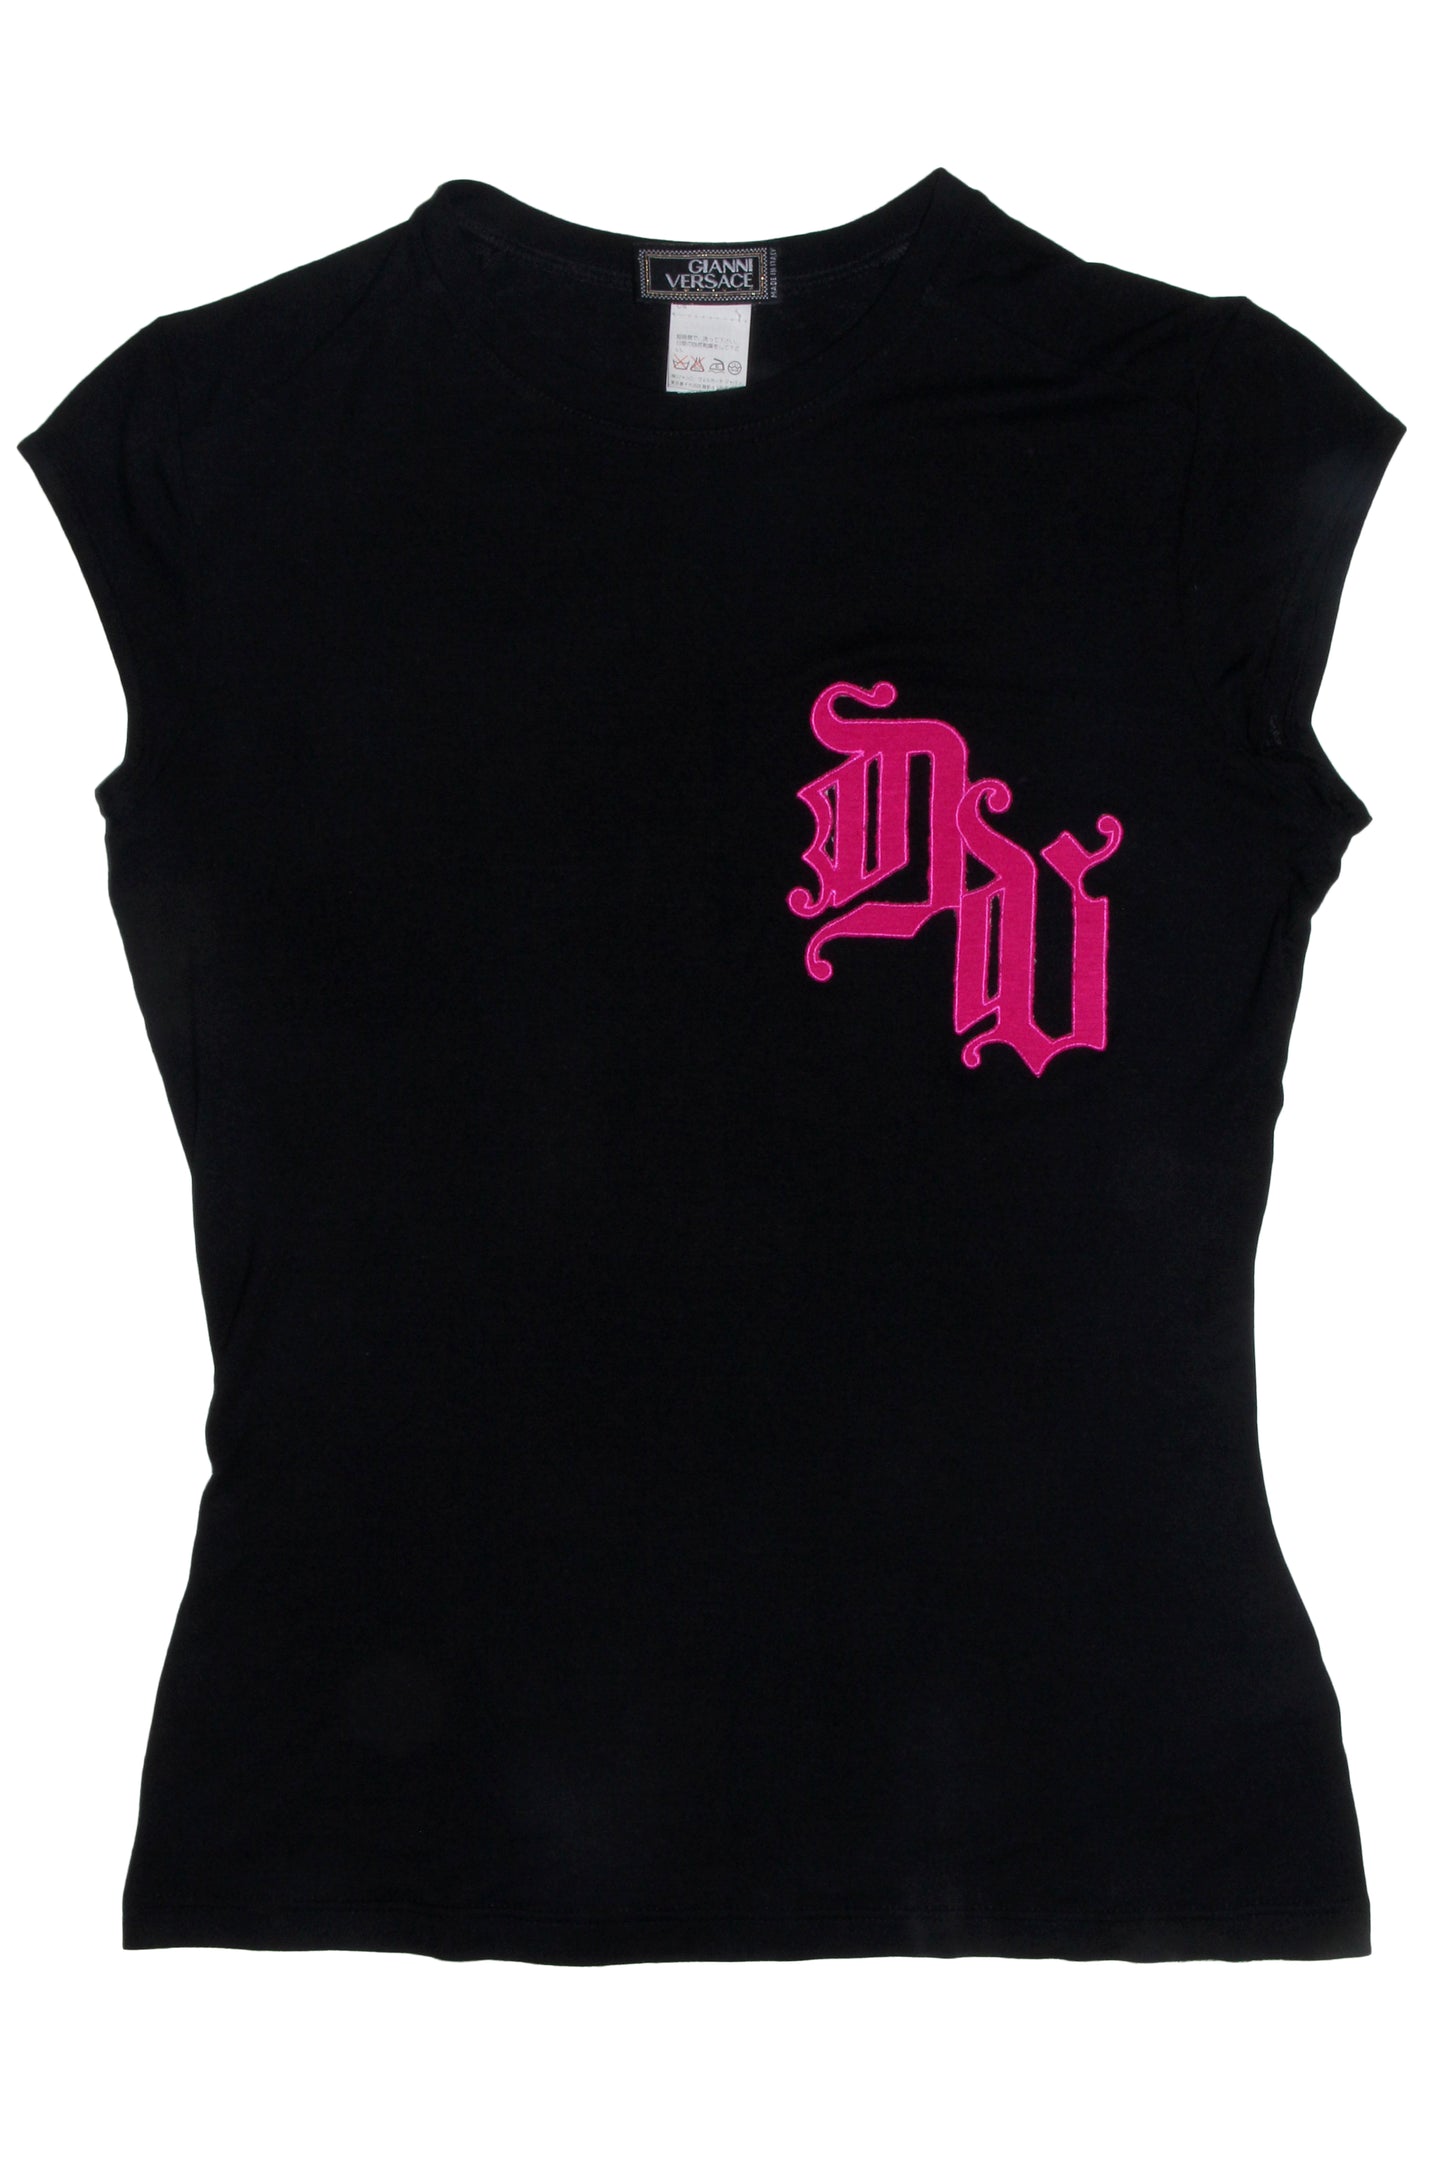 GIANNI VERSACE COUTURE GOTHIC LOGO TOP